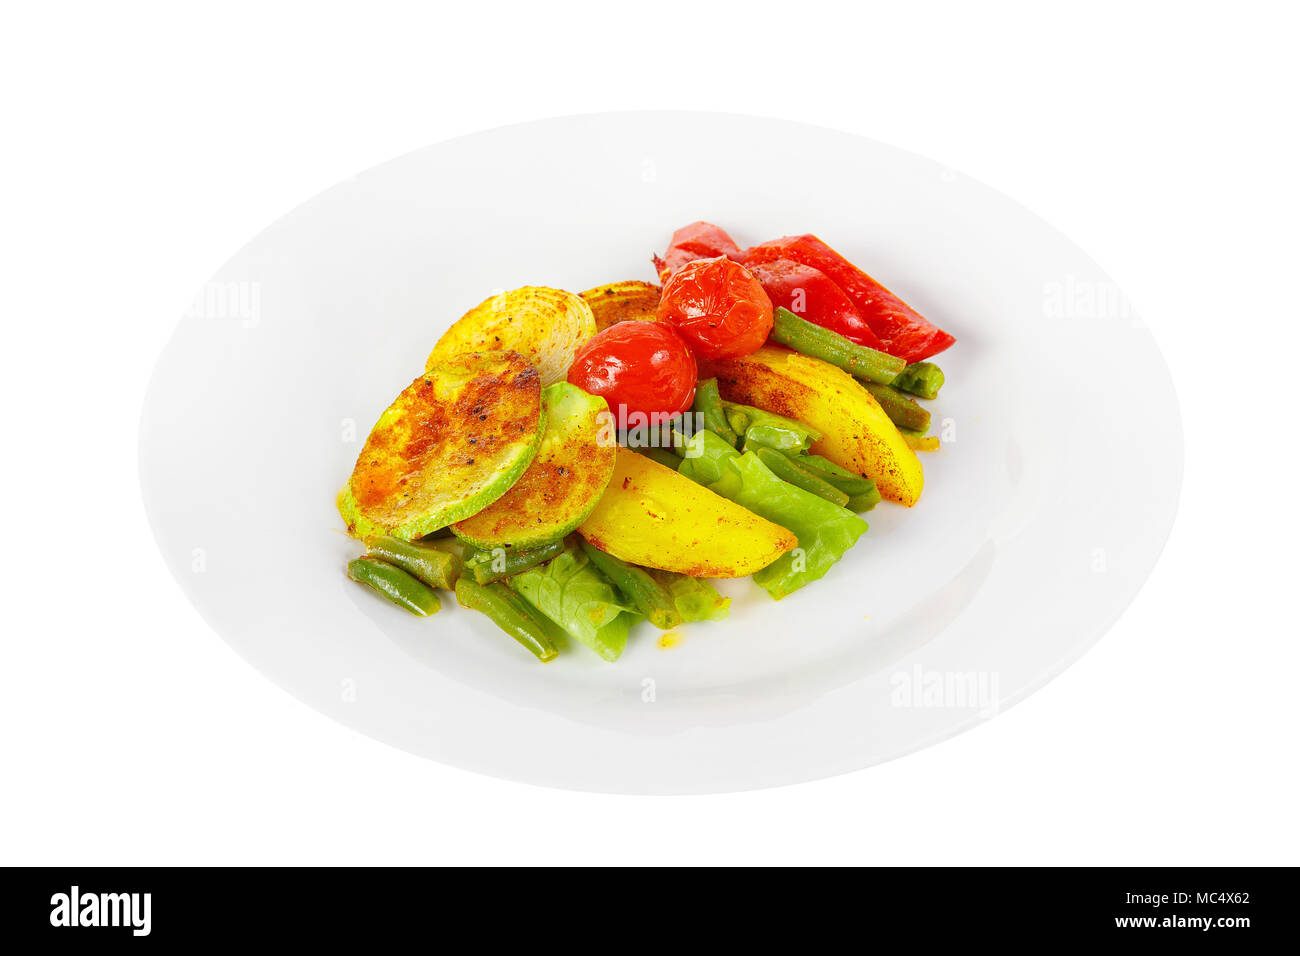 Vegetables grilled portion of side dish on a plate on white isolated background Side view. Appetizing dish for the menu restaurant, bar, cafe Stock Photo